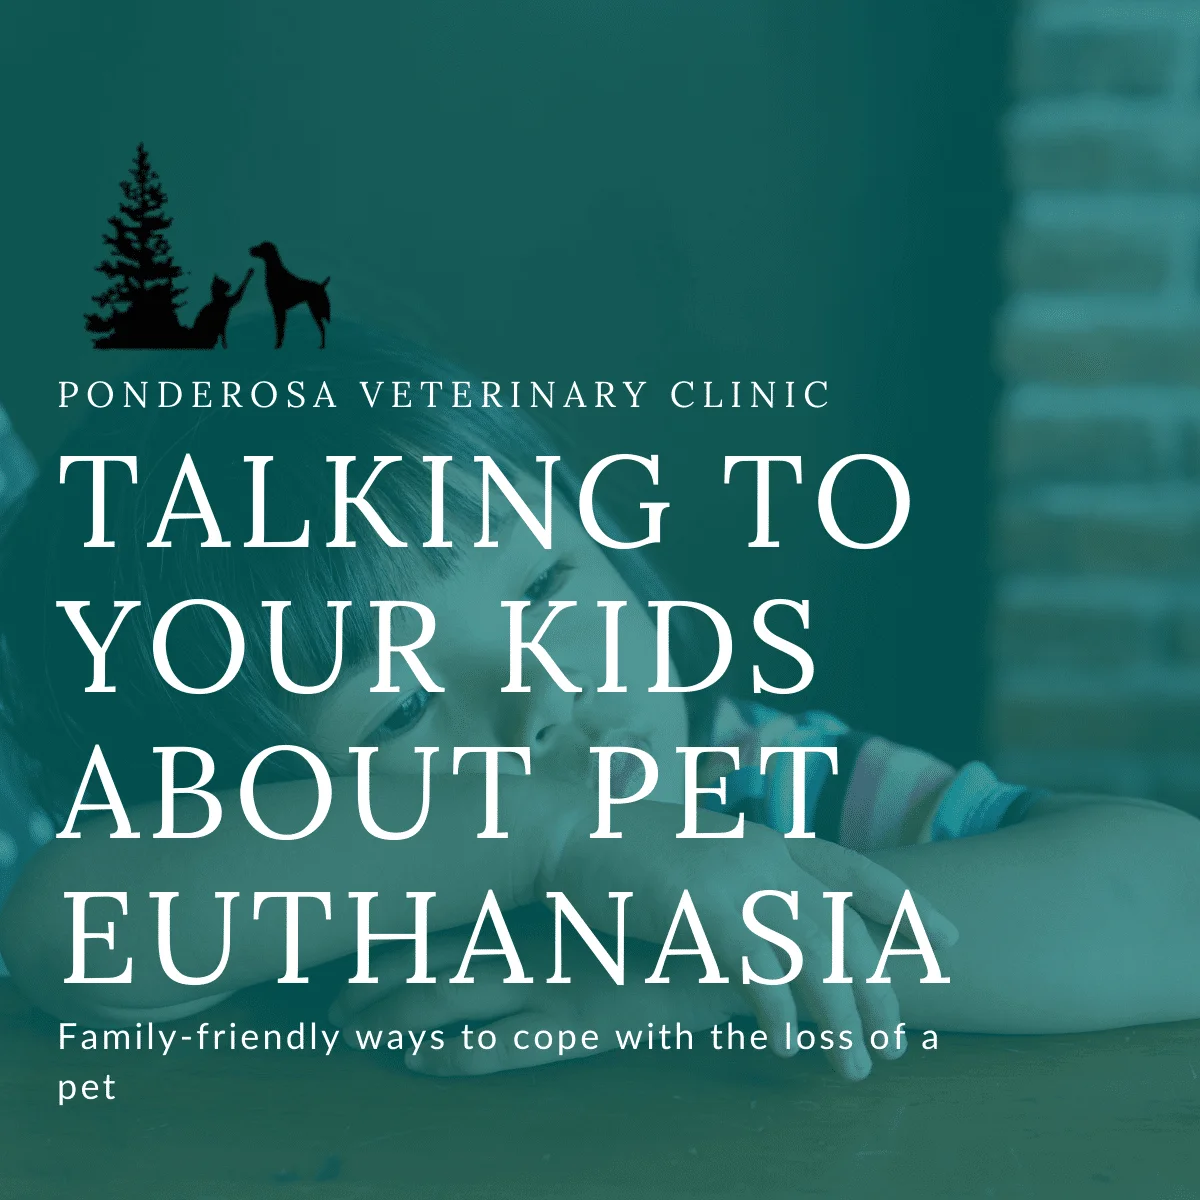 Child resting head on hands and looking sad in order to depict how to talk to your kids about pet euthanasia